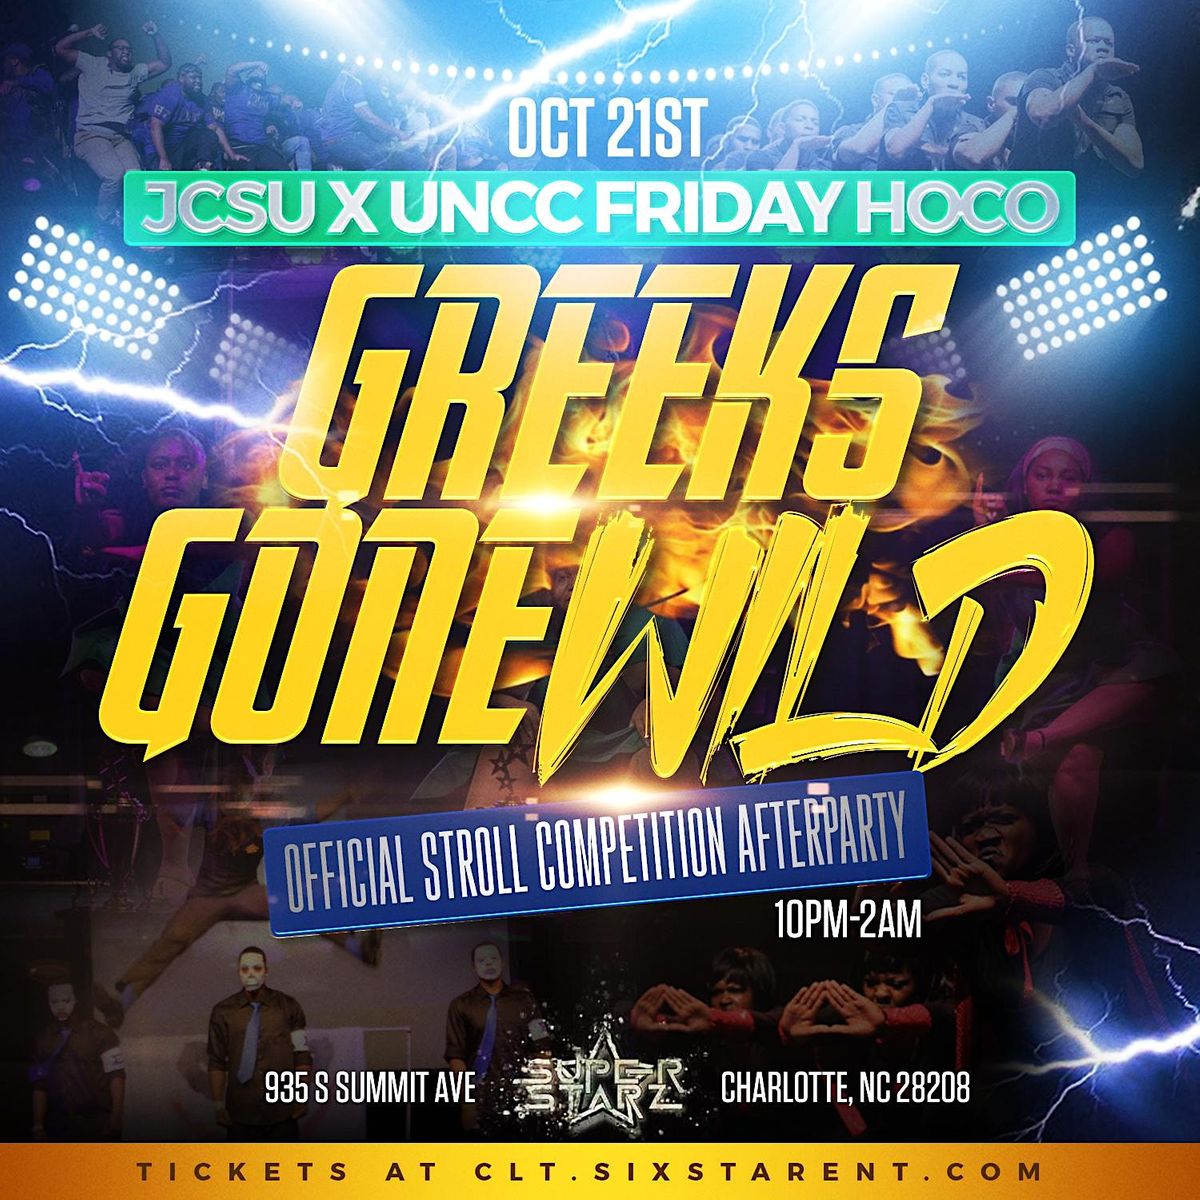 JCSU X UNCC Friday Hoco: Greeks Gone Wild Official Stroll Comp Afterparty